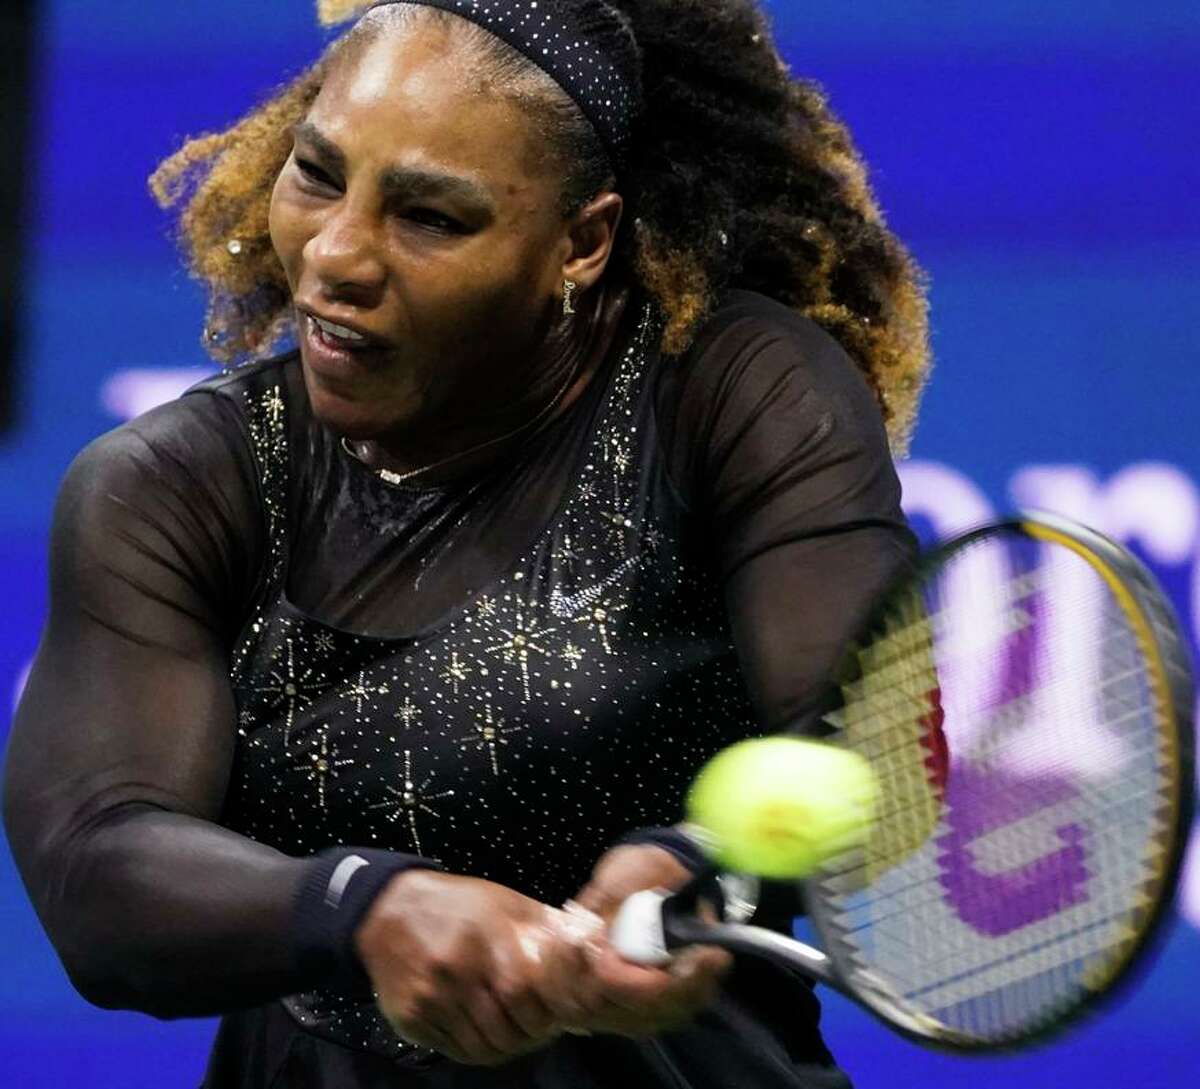 Serena Williams advanced to the third round of the U.S. Open after owning the third set against Anett Kontaveit.